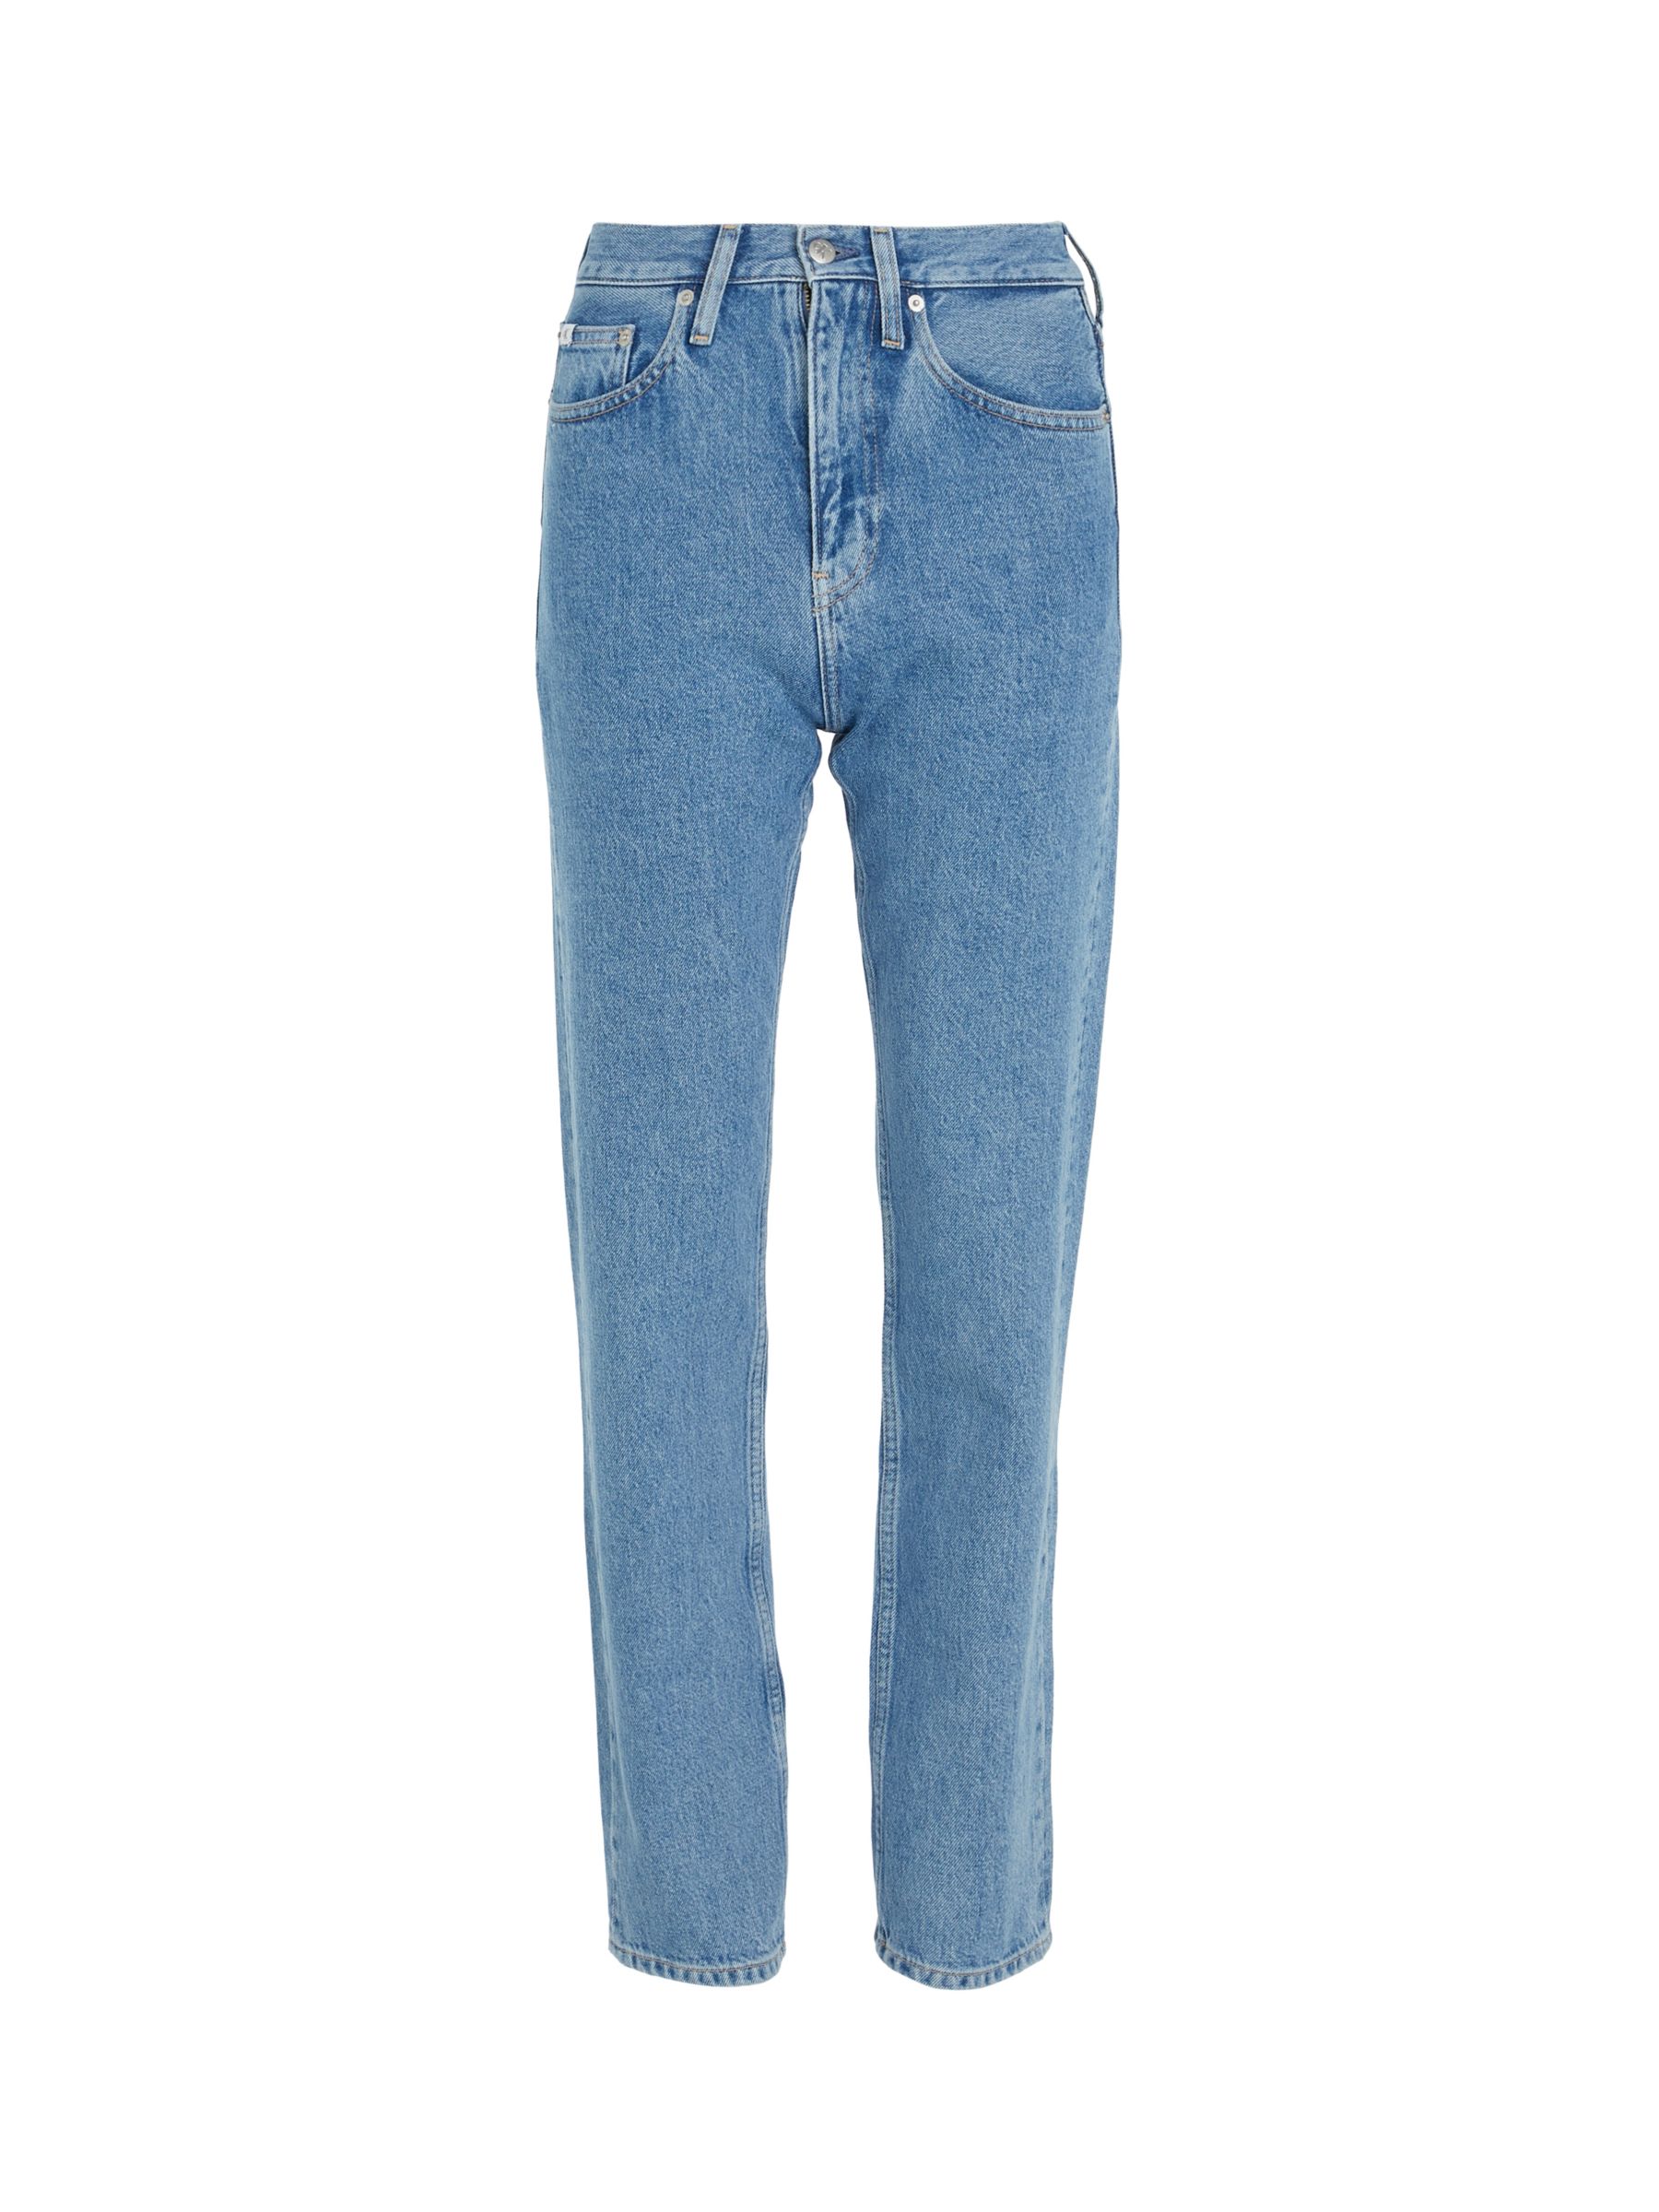 Buy Calvin Klein High Rise Straight Cut Jeans Online at johnlewis.com